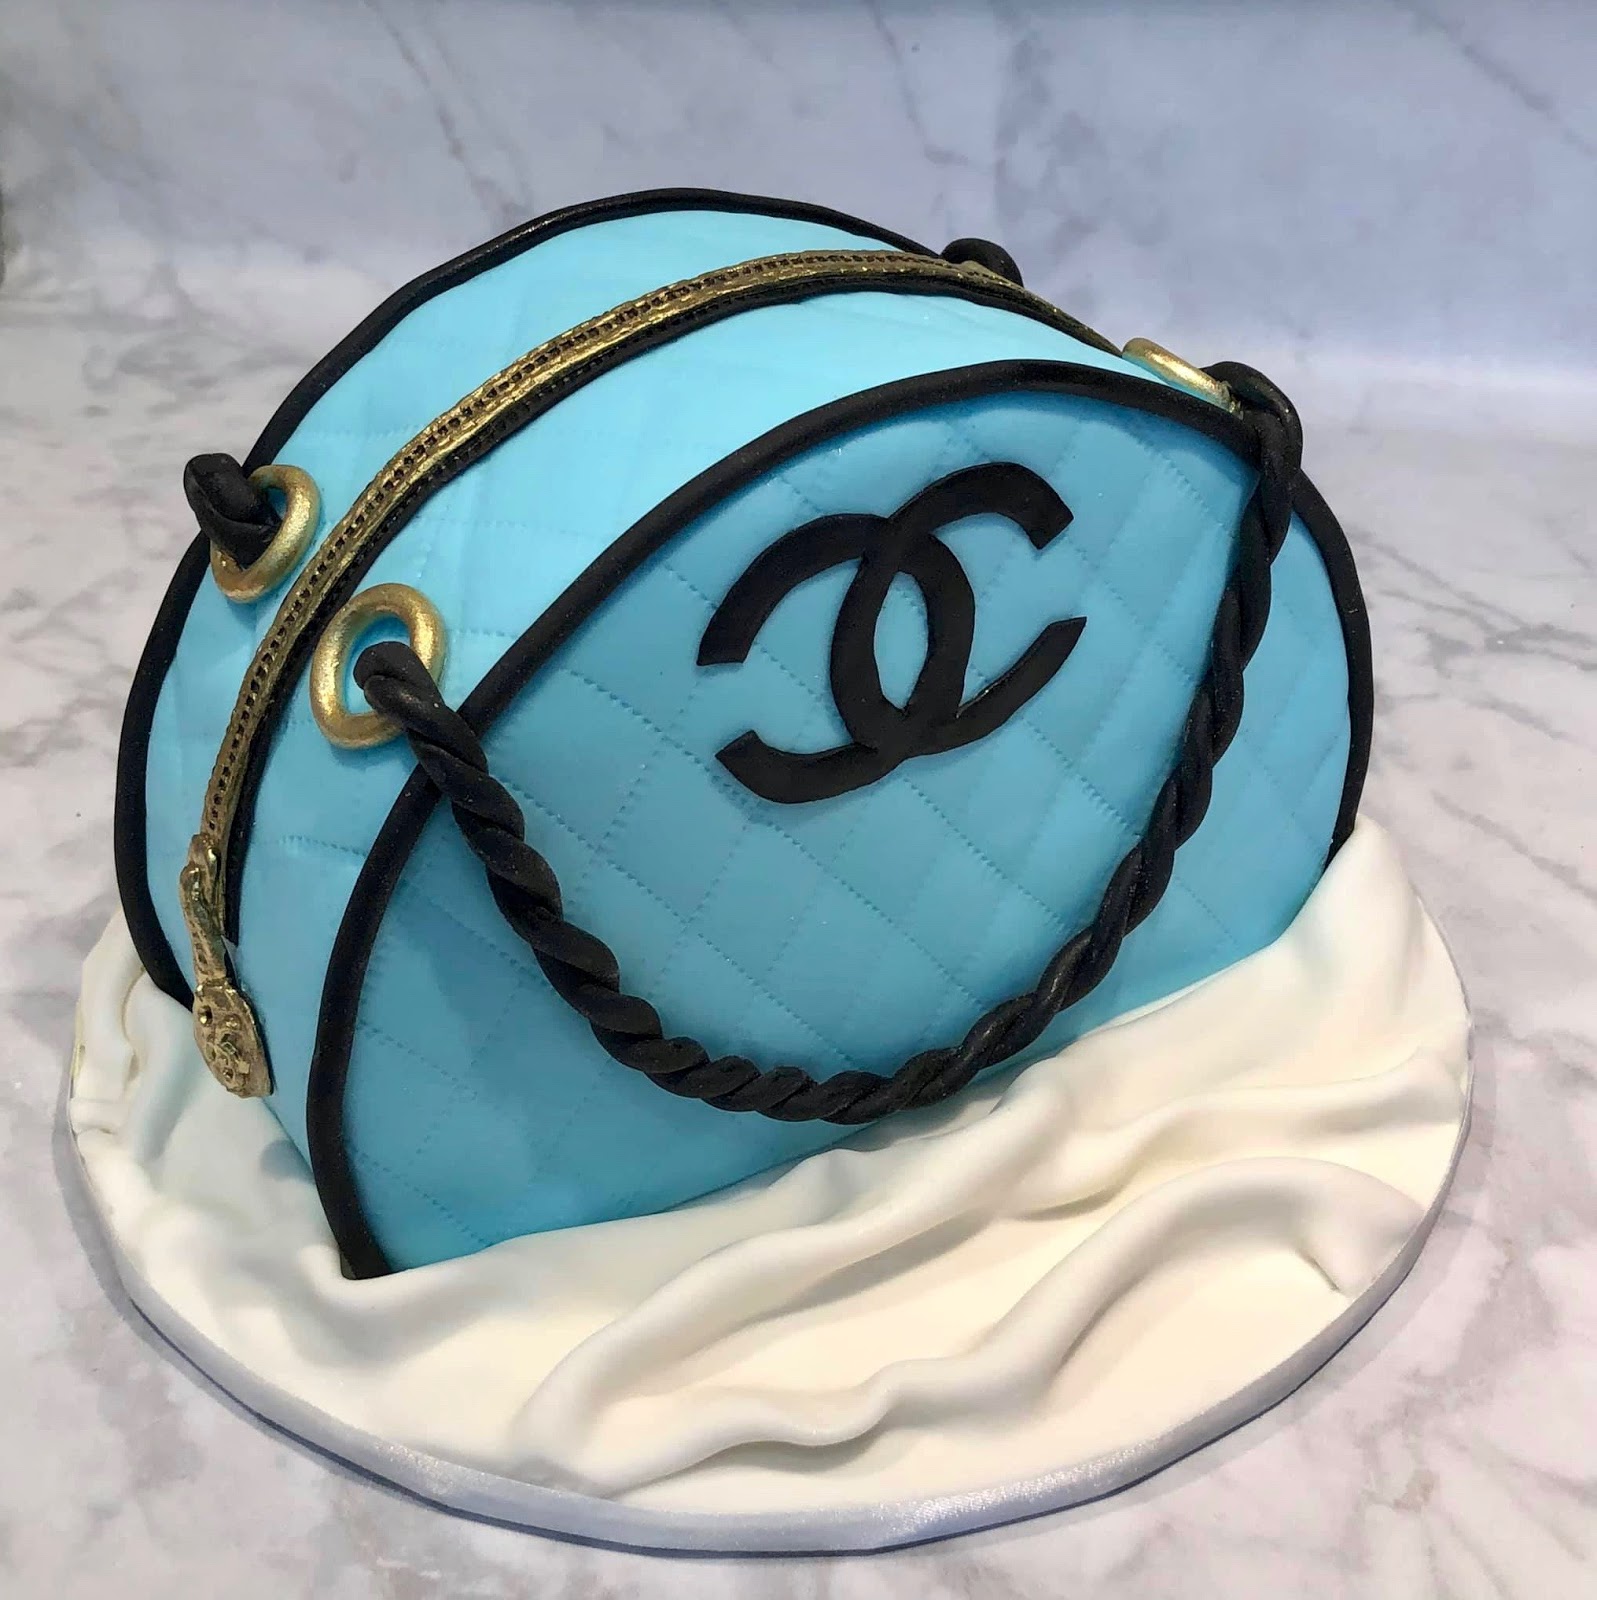 Purse Cake Step by Step (easy) - YouTube